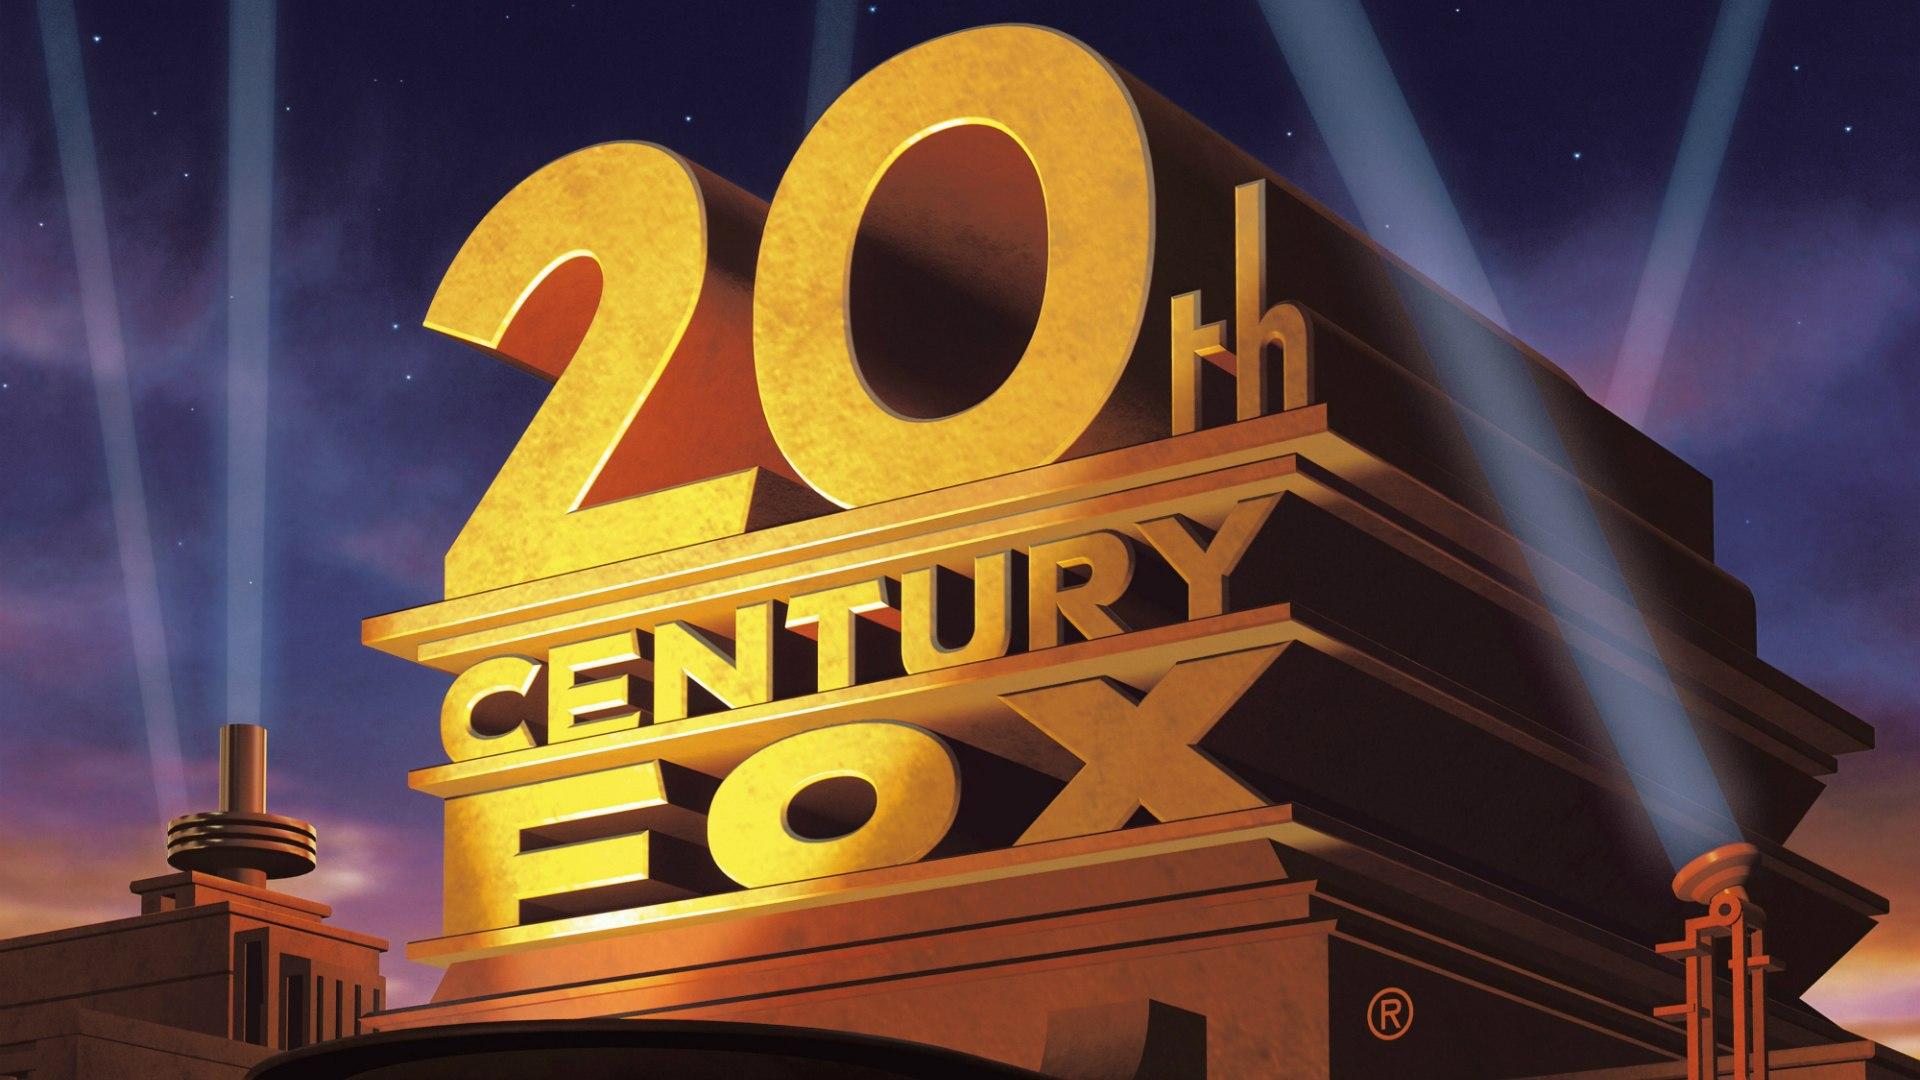 The Film Company 20th Century Fox Wallpaper And Image